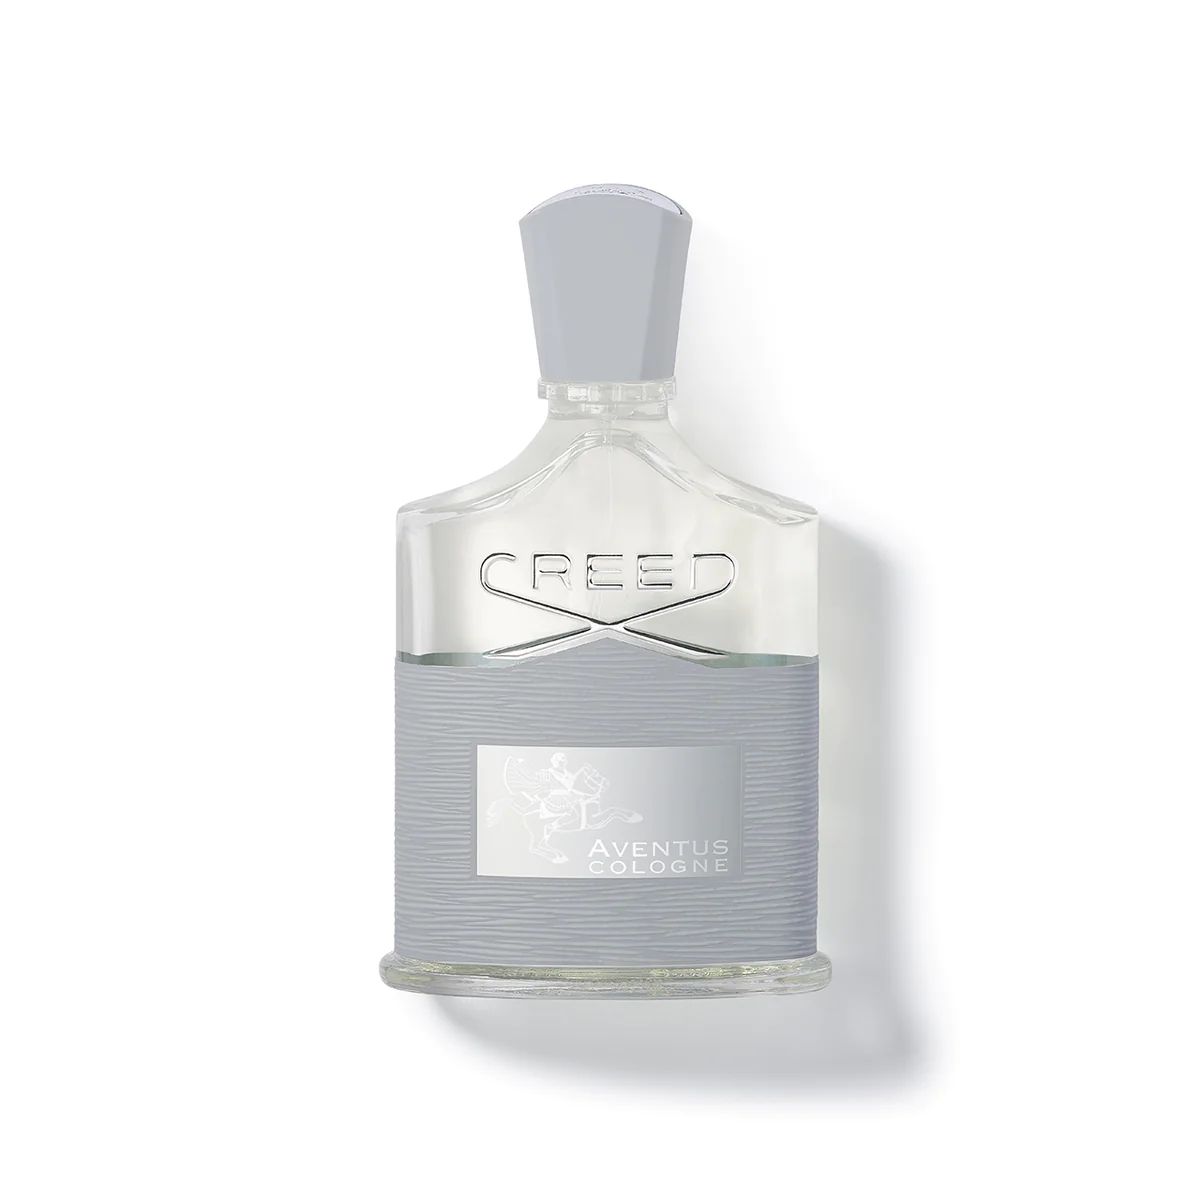 Парфюмерная вода Creed Aventus Cologne 100 мл creed silver mountain water 100